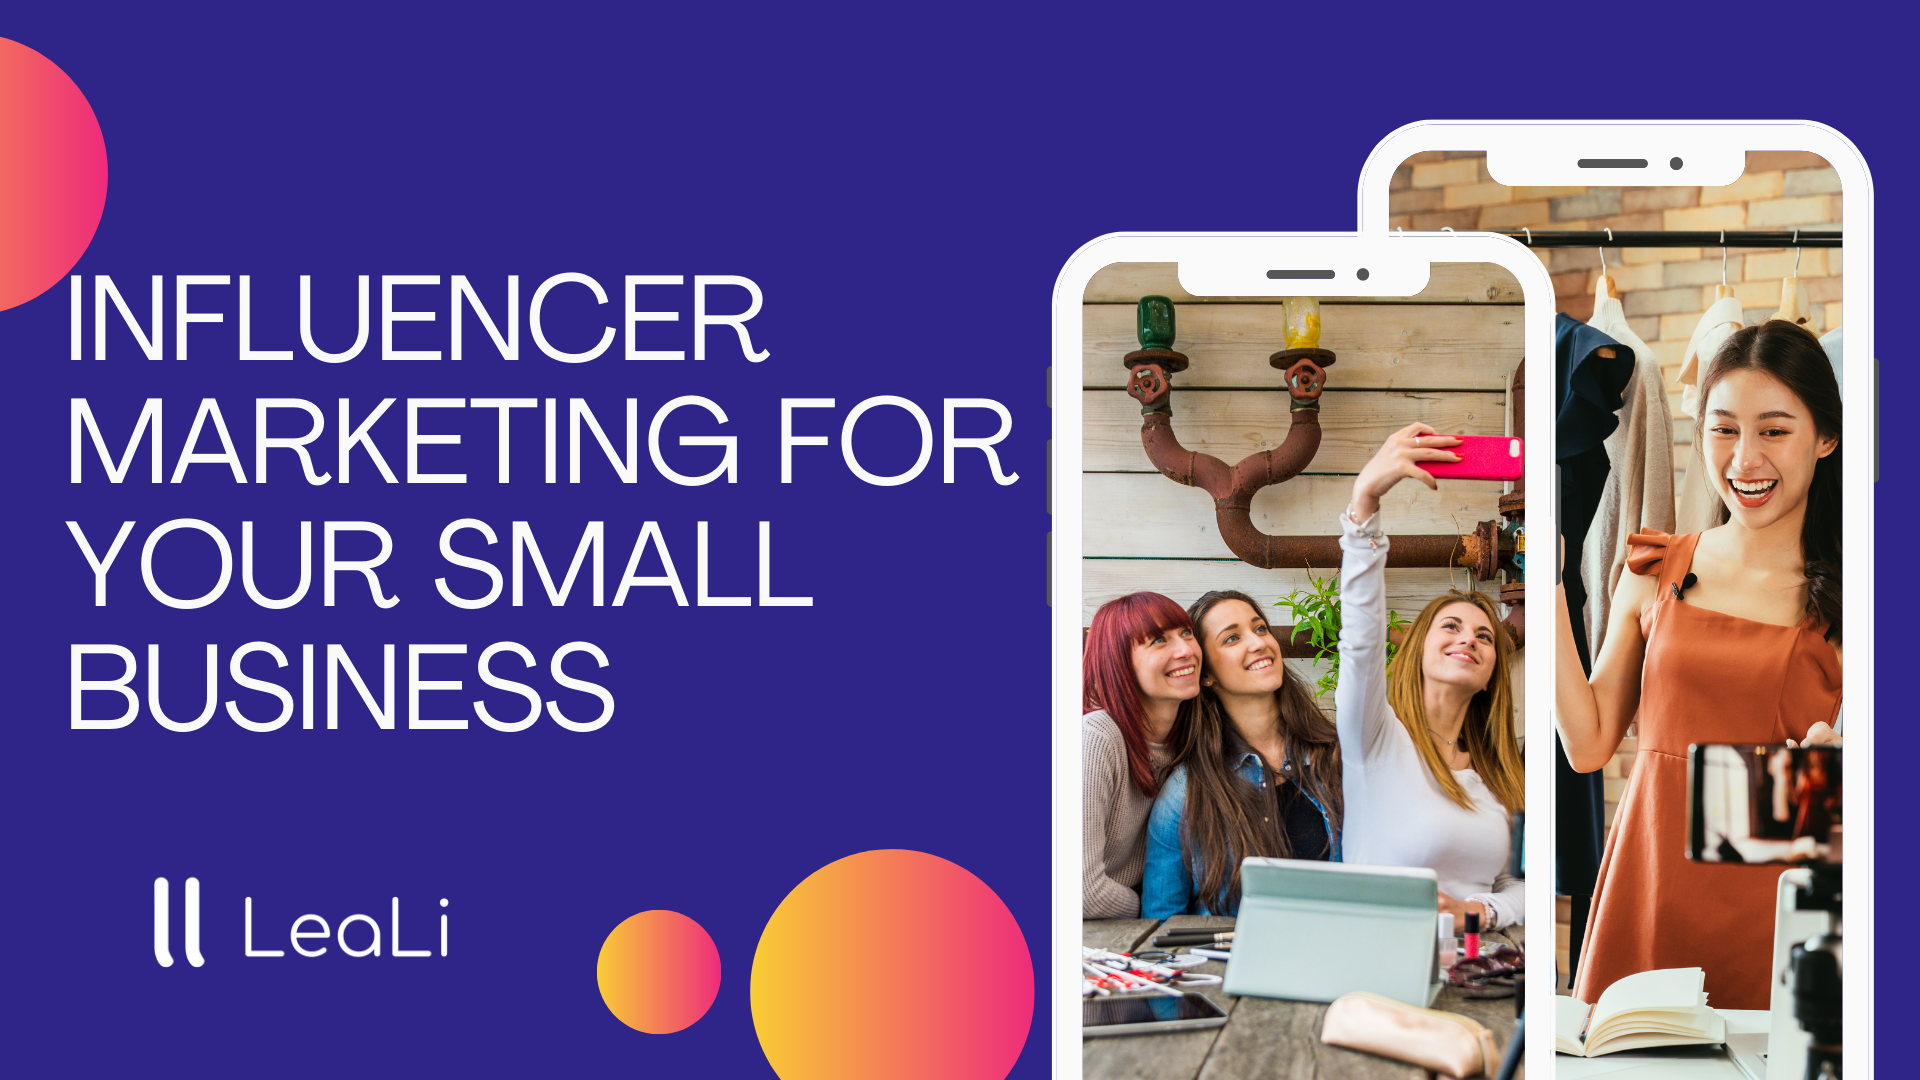 How to Leverage Influencer Marketing for Your Small Business